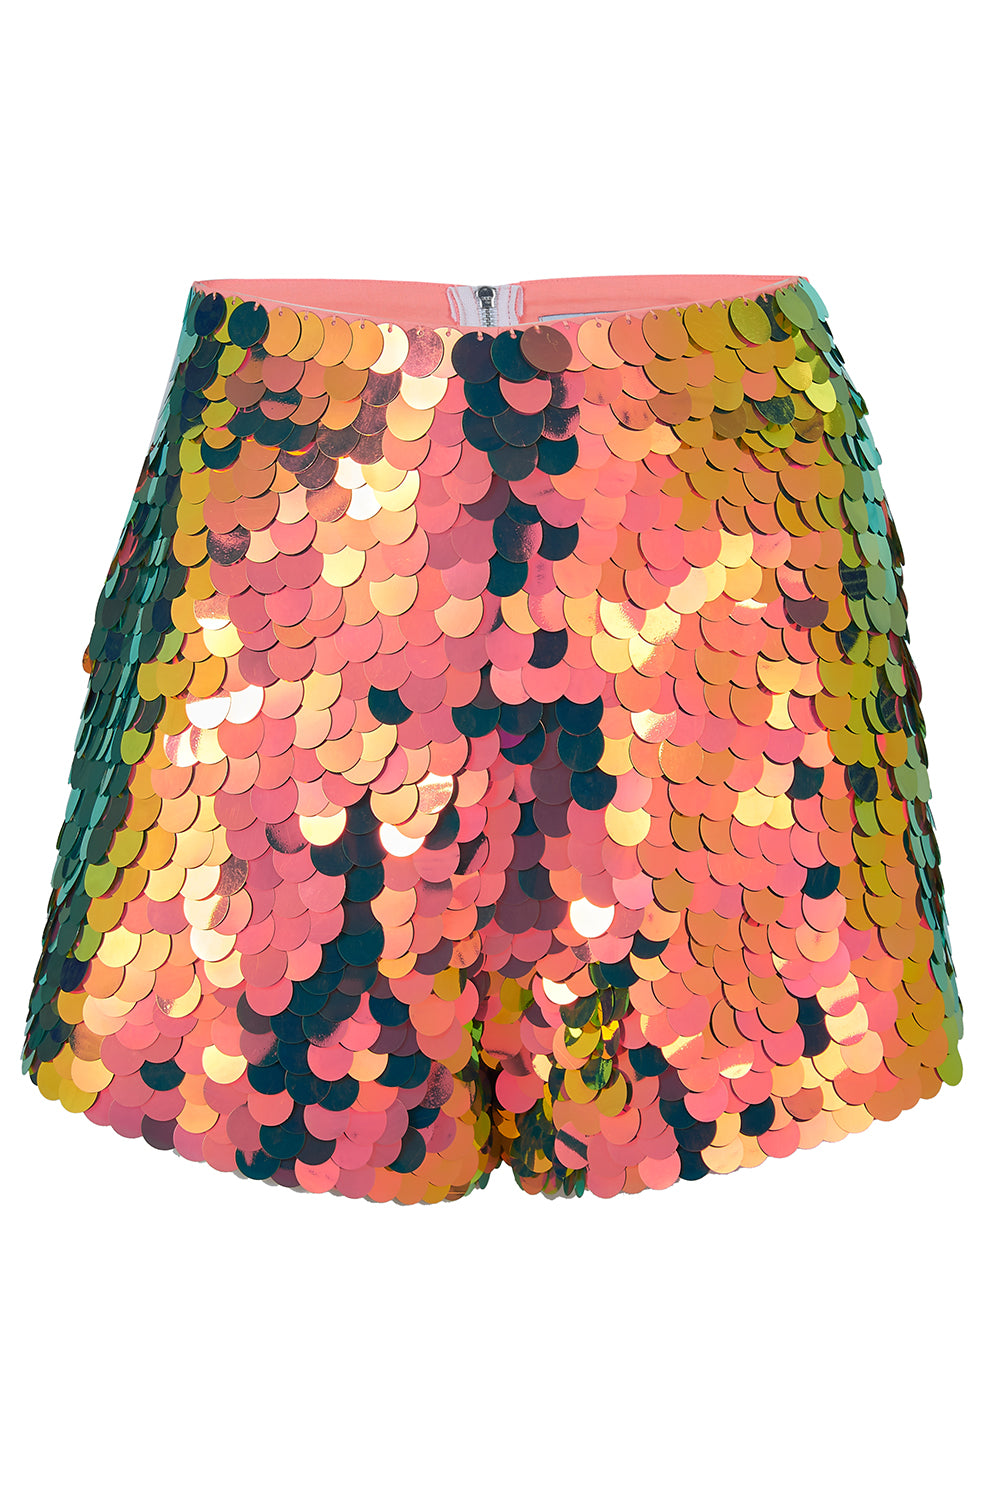 Juno shorts in Flame